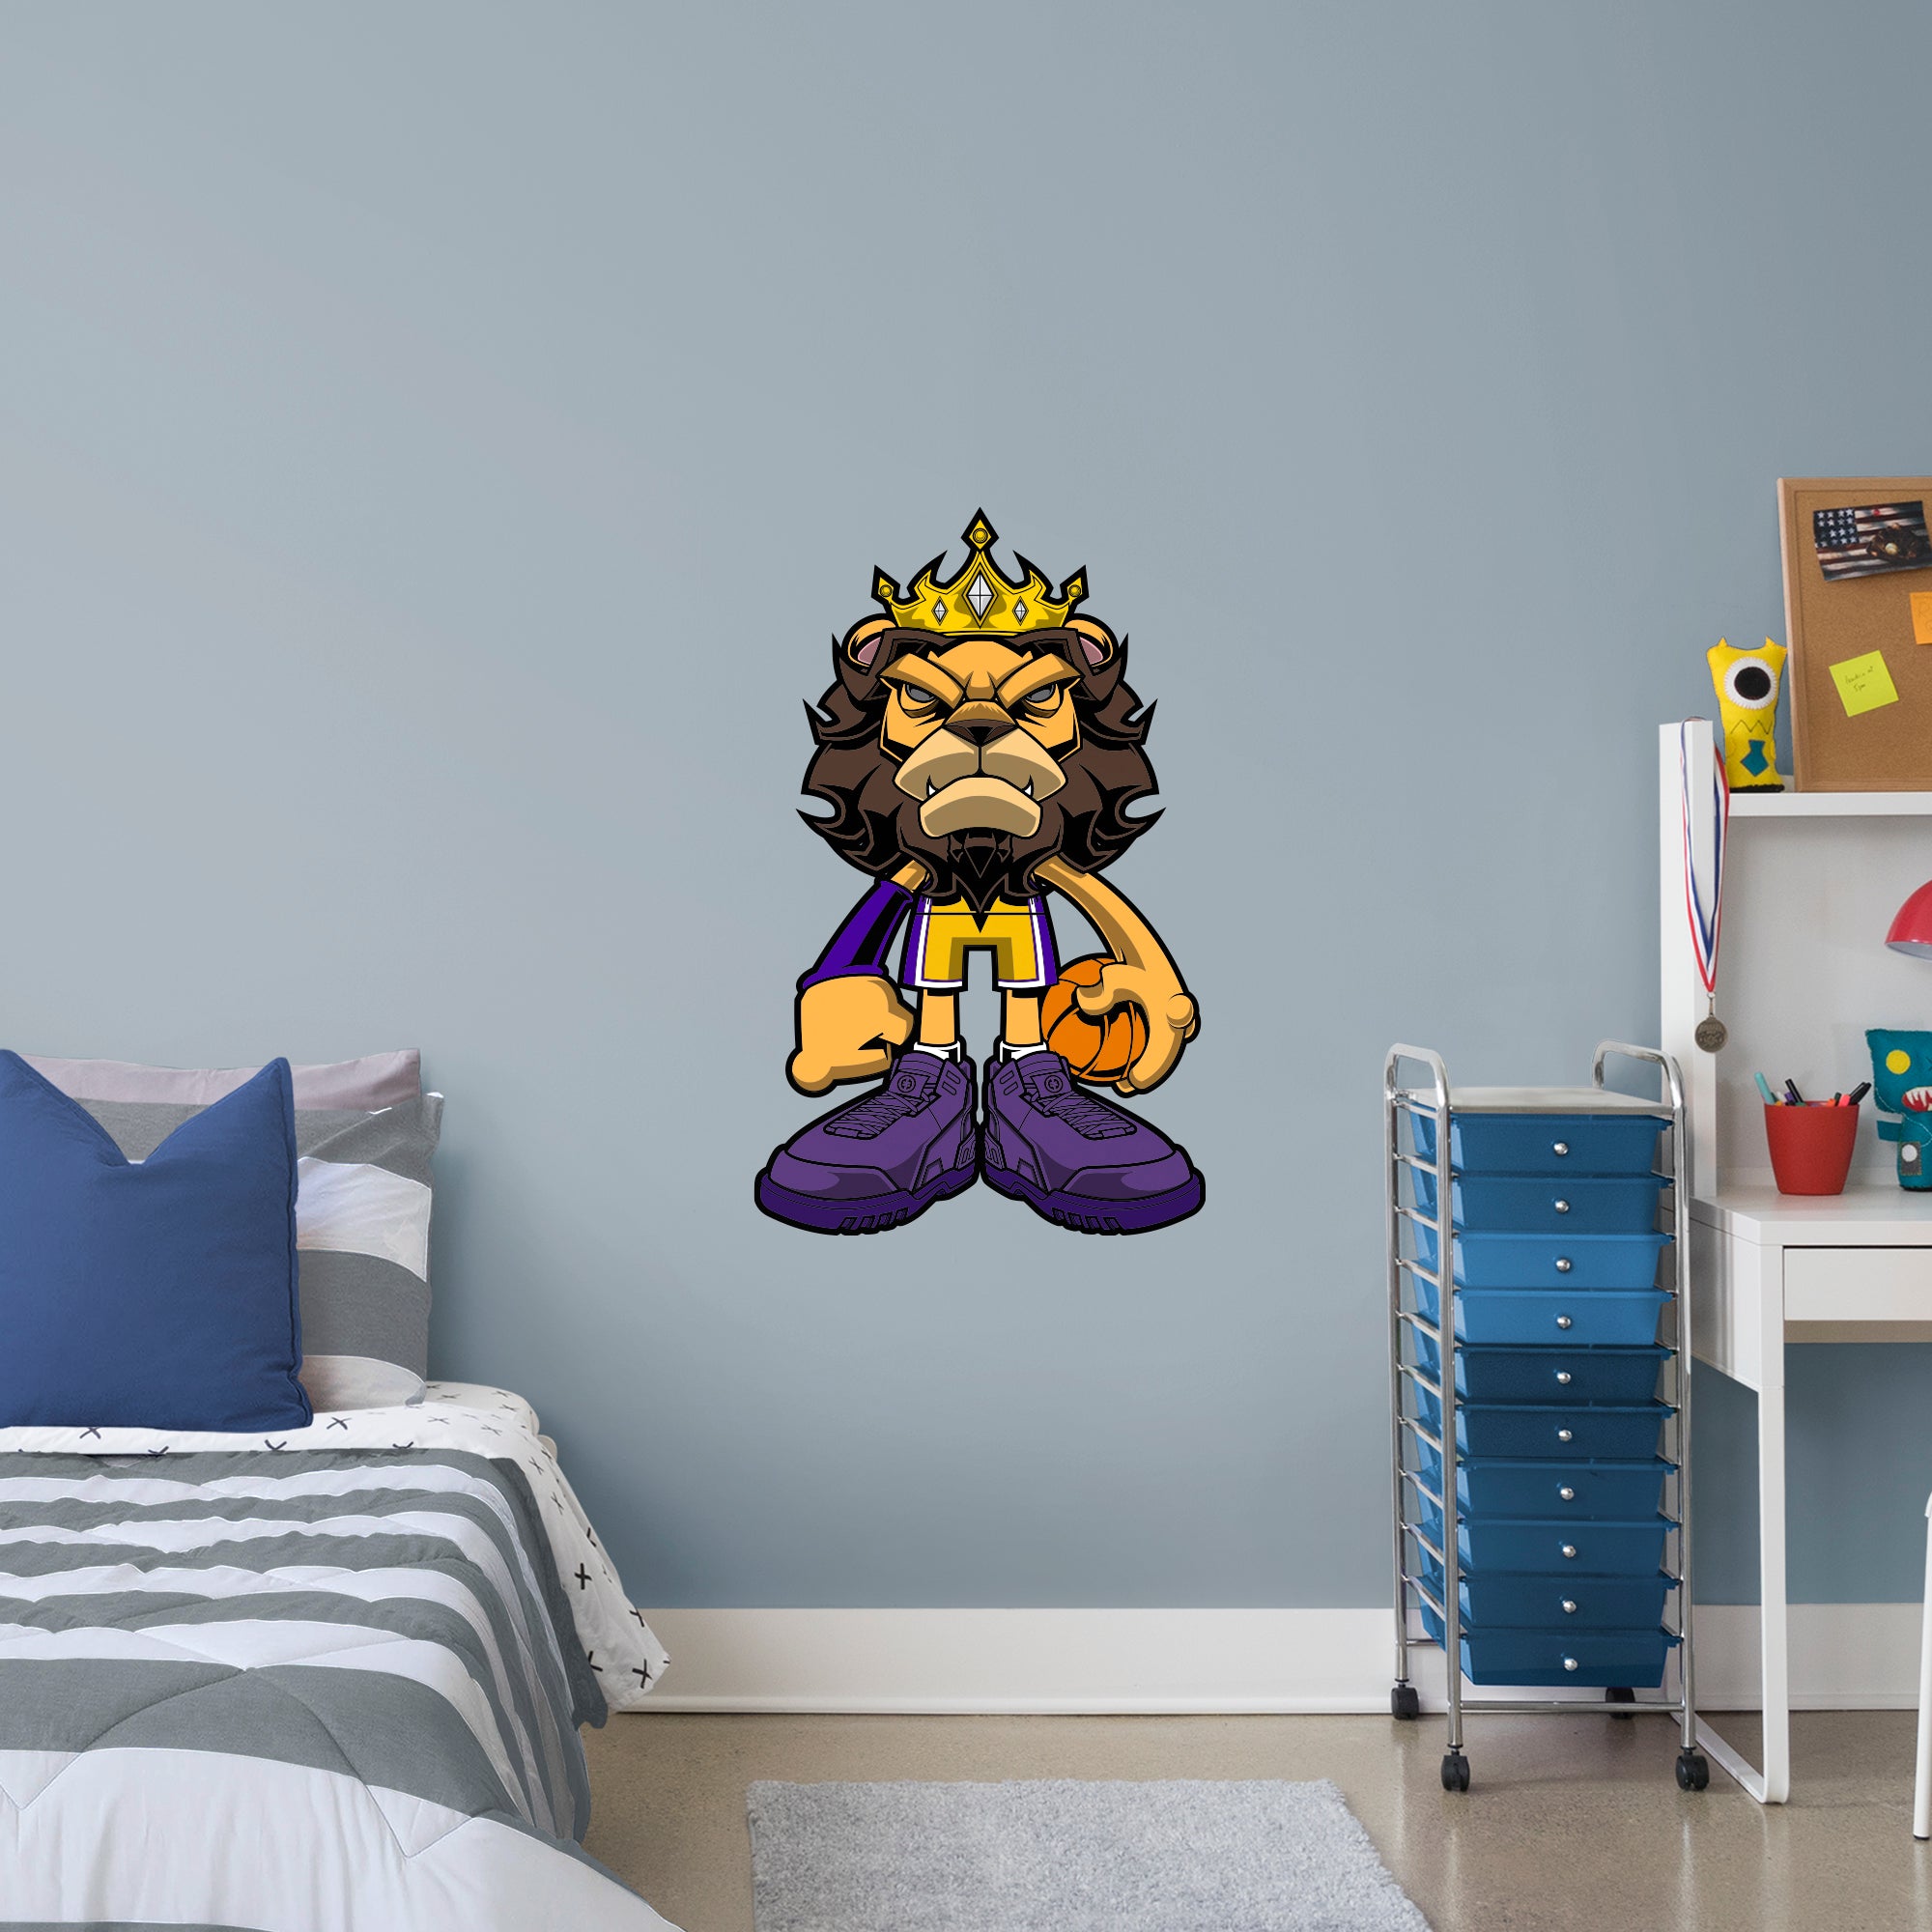 Top 3 - The King: Tracy Tubera - Removable Vinyl Wall Decal XL by Fathead